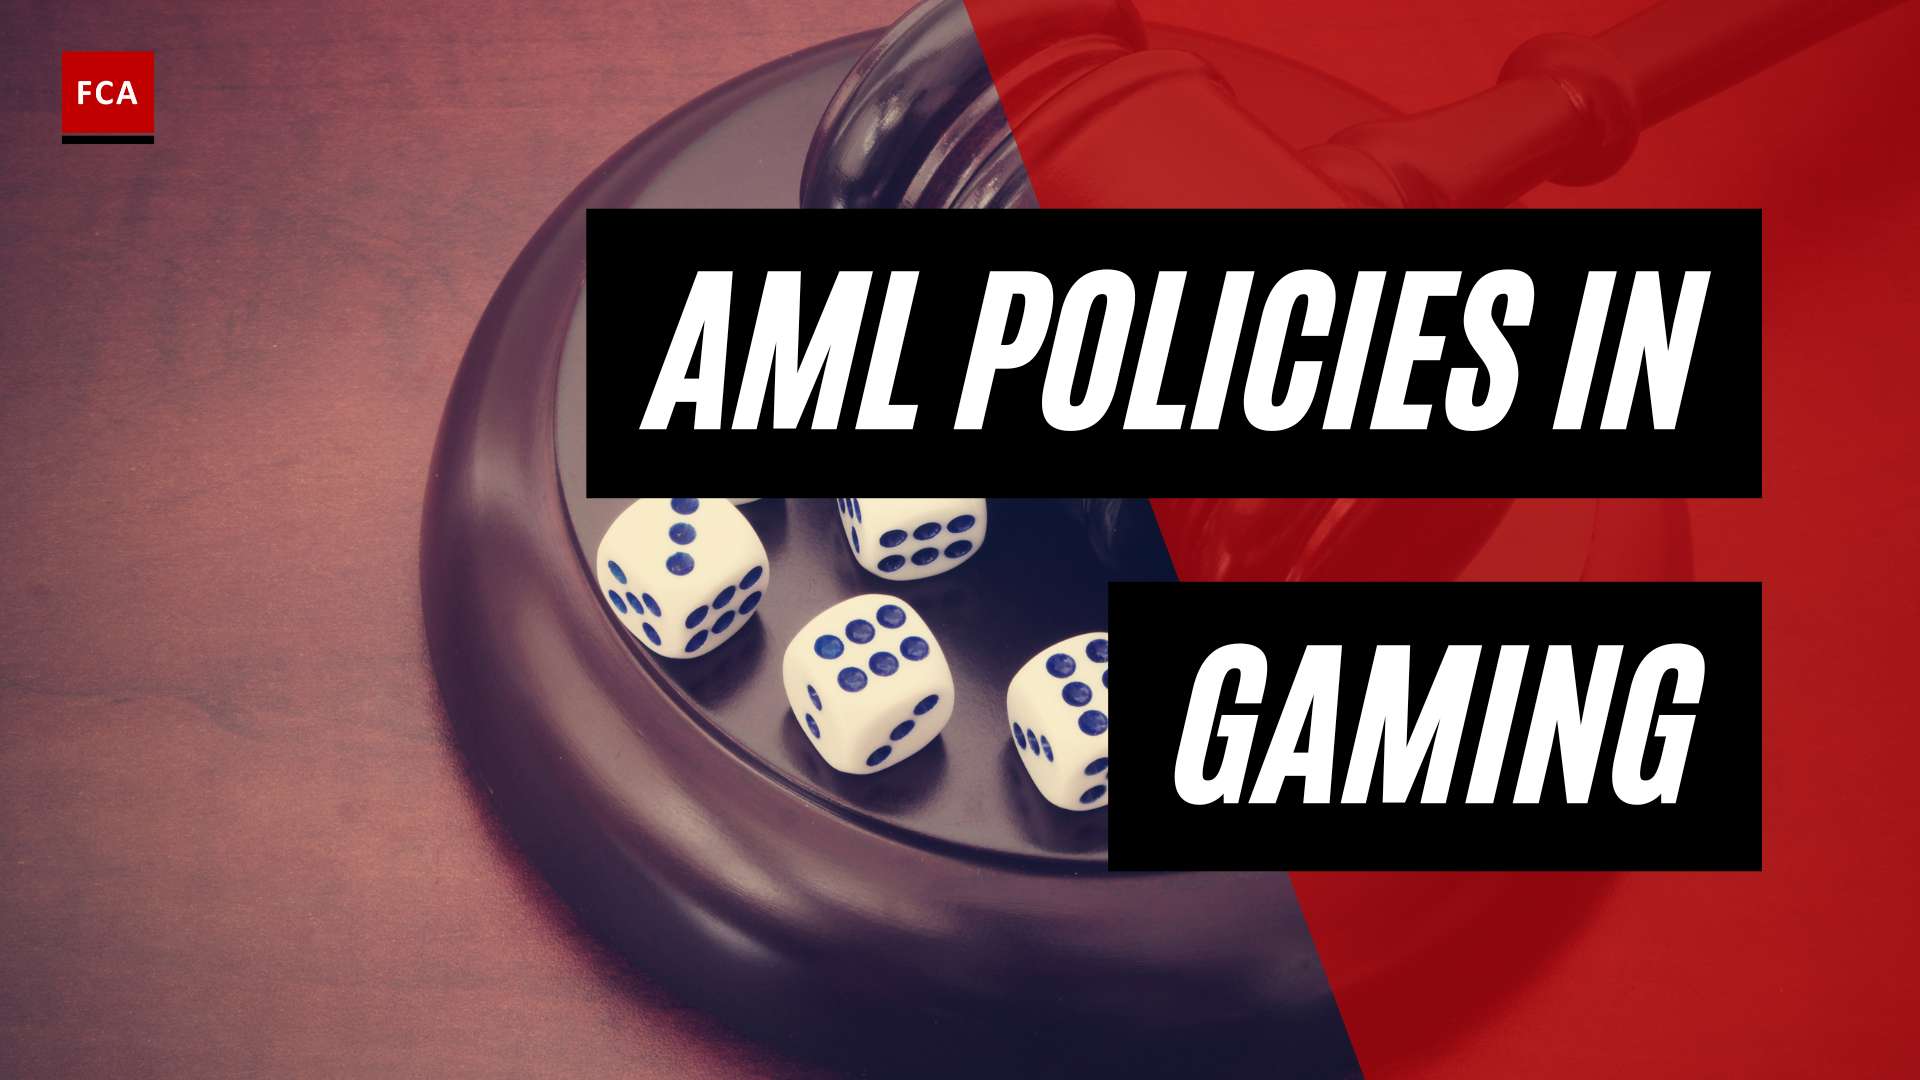 Playing By The Rules: Demystifying Aml Policies In The Gaming Industry